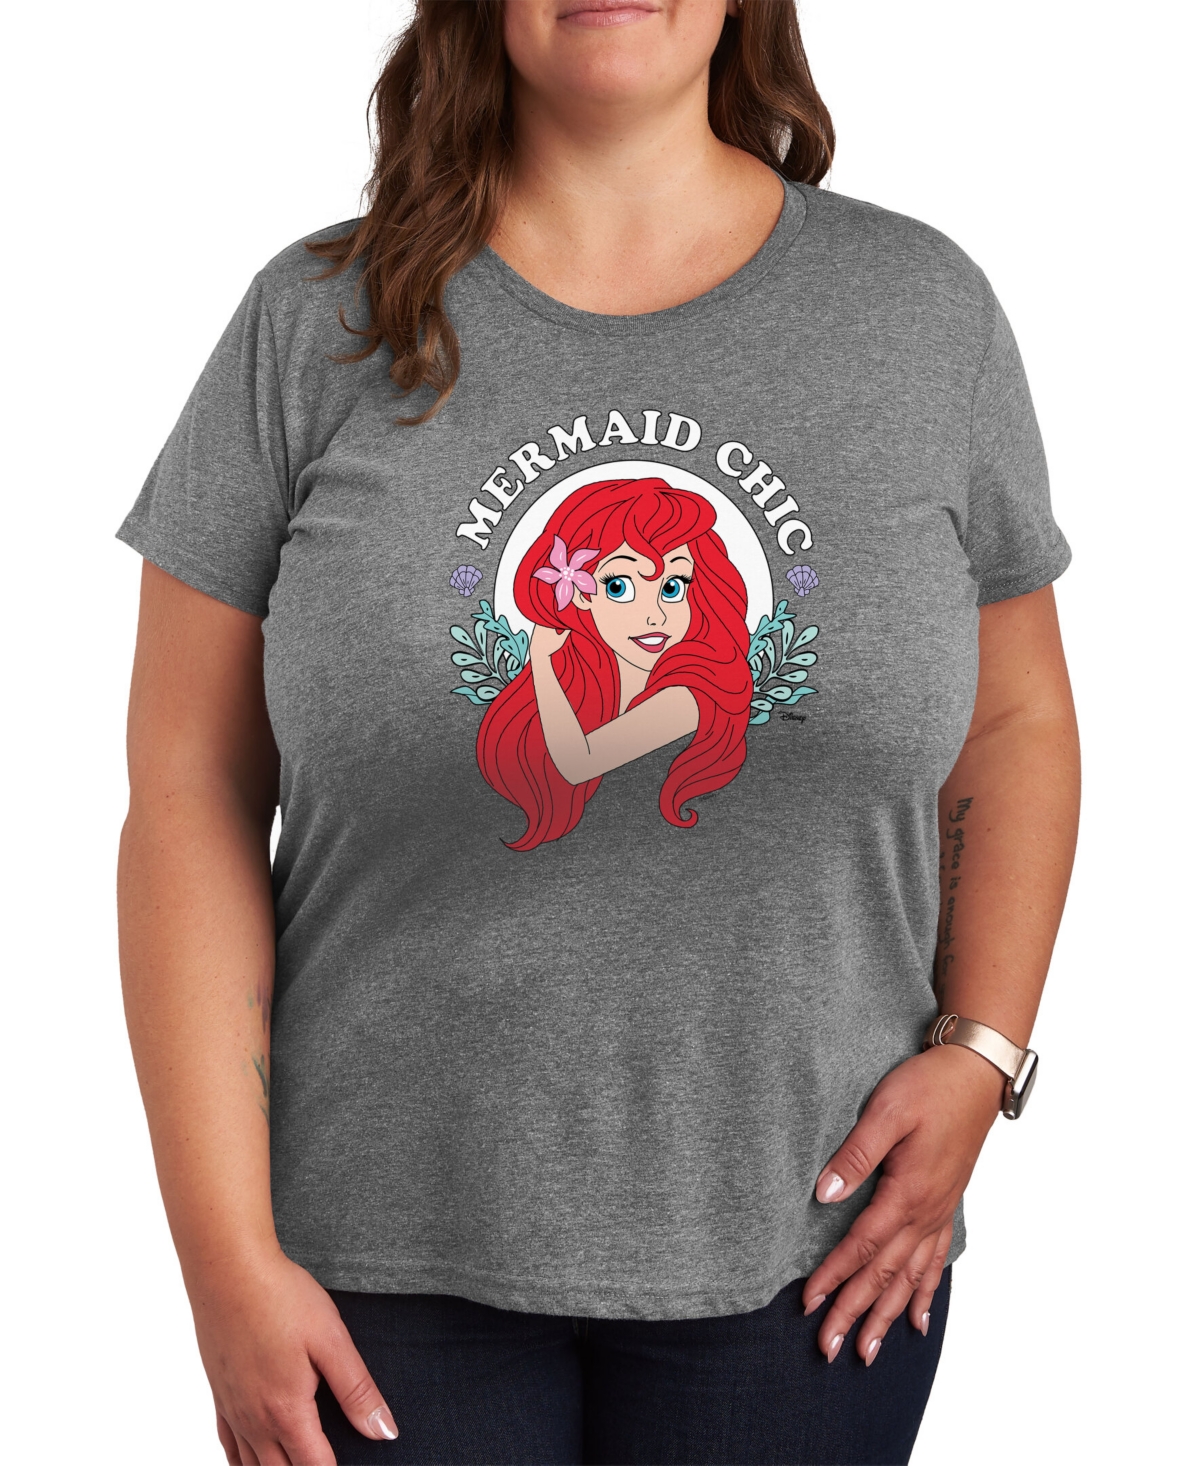 Air Waves Trendy Plus Size Little Mermaid Graphic T-shirt - Gray